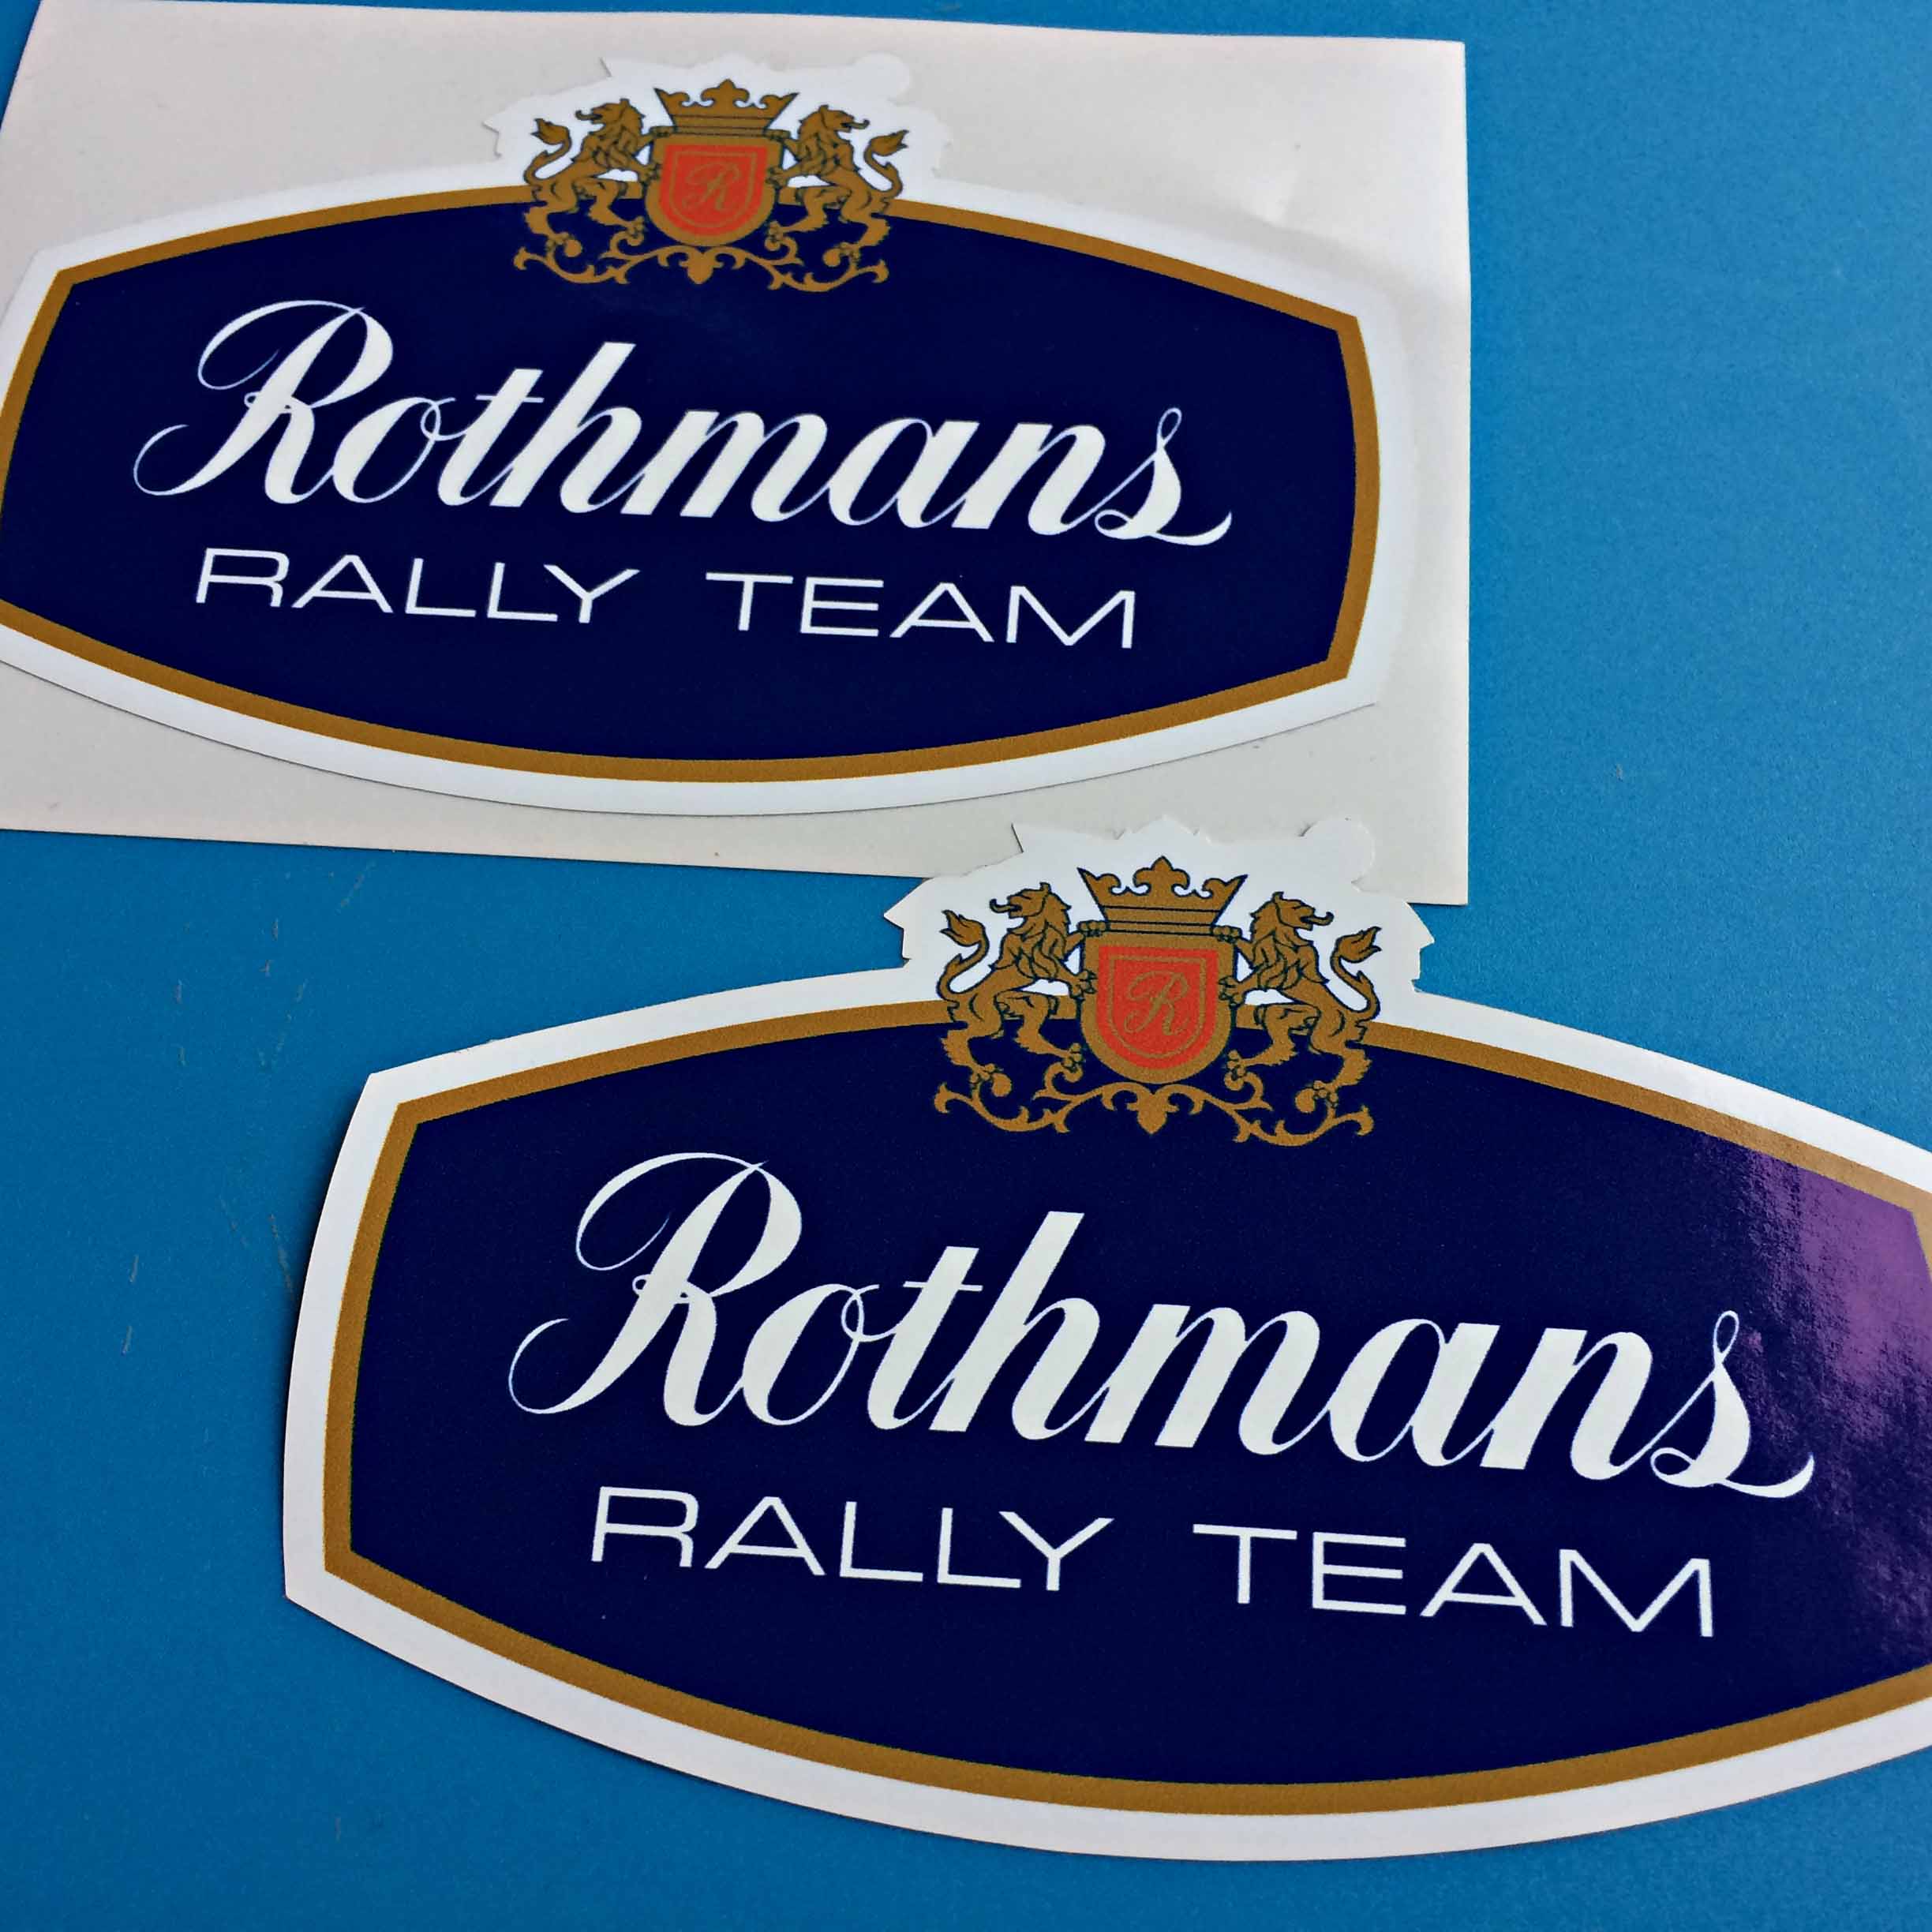 ROTHMANS RALLY TEAM STICKERS. Rothmans Rally Team in white lettering on a blue background. Two golden lions are either side of a gold crown and shield. The shield has a gold R on a red background.